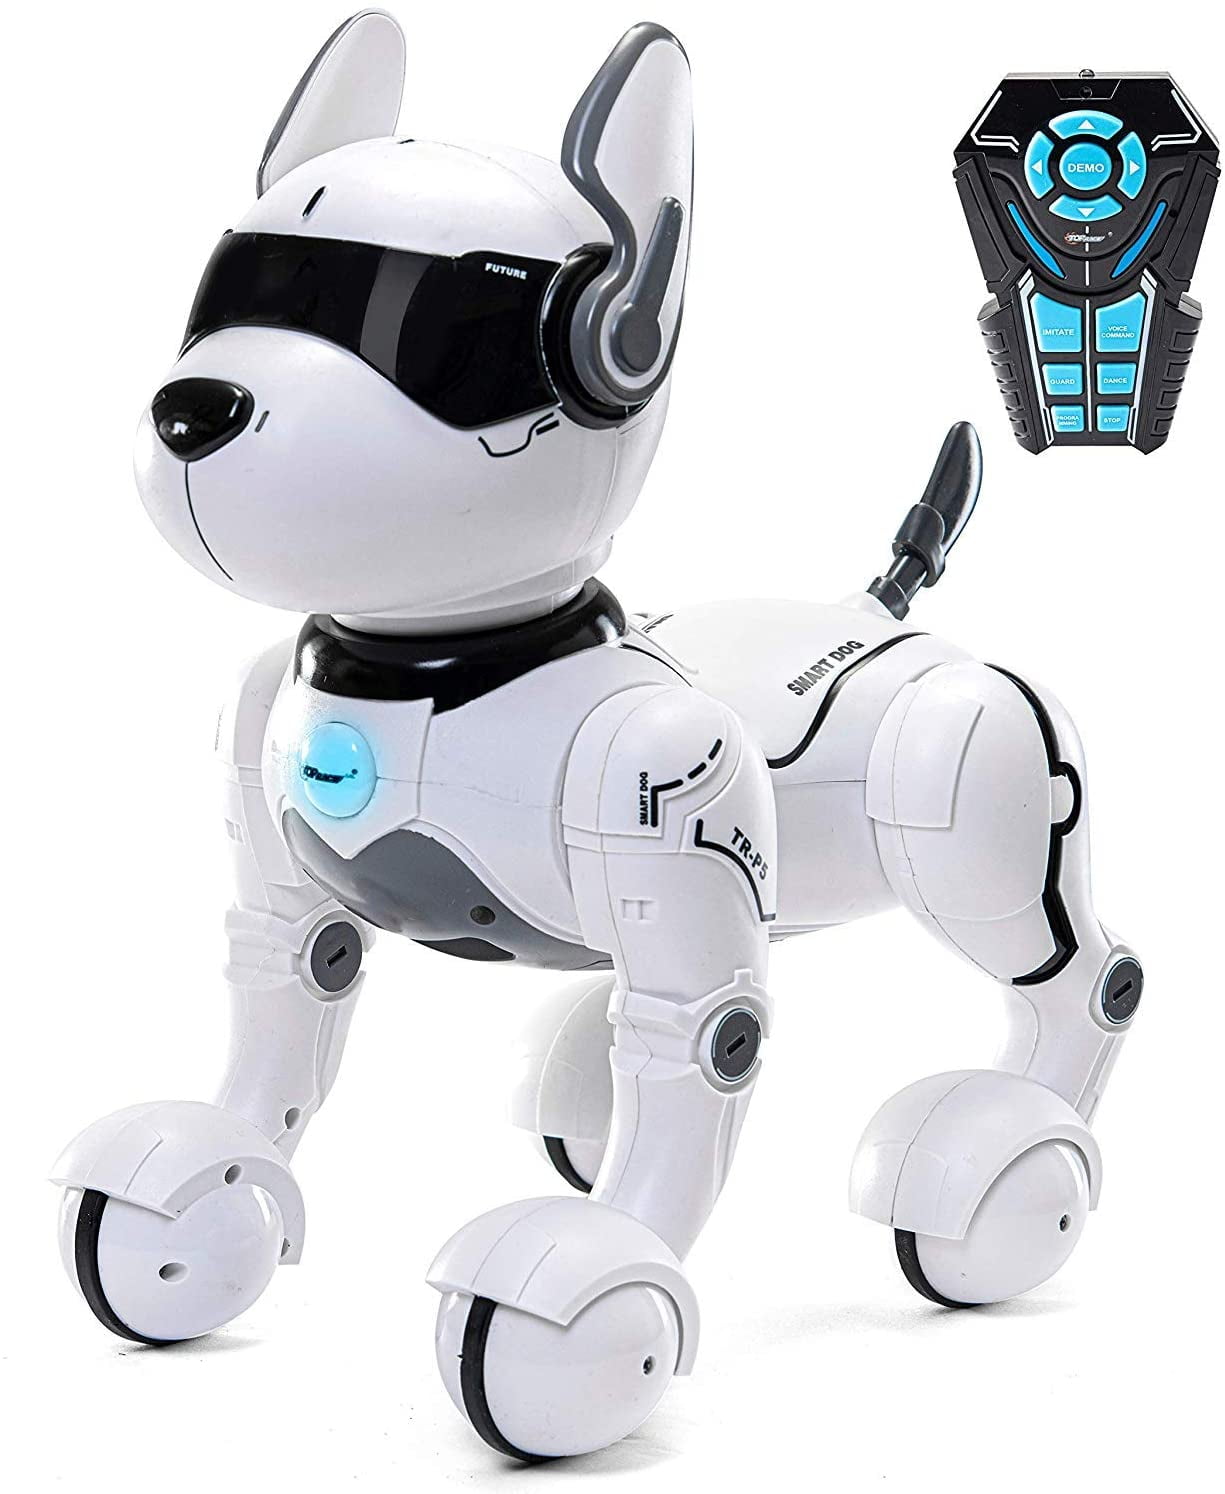 Remote Control Robot Dog Toy For Kids Interactive Smart Dancing To Beat Puppy Robot Act Like Real Dogs Gift Toy For Girls Boys Ages 2 3 4 5 6 7 8 9 10 Years Walmart Com